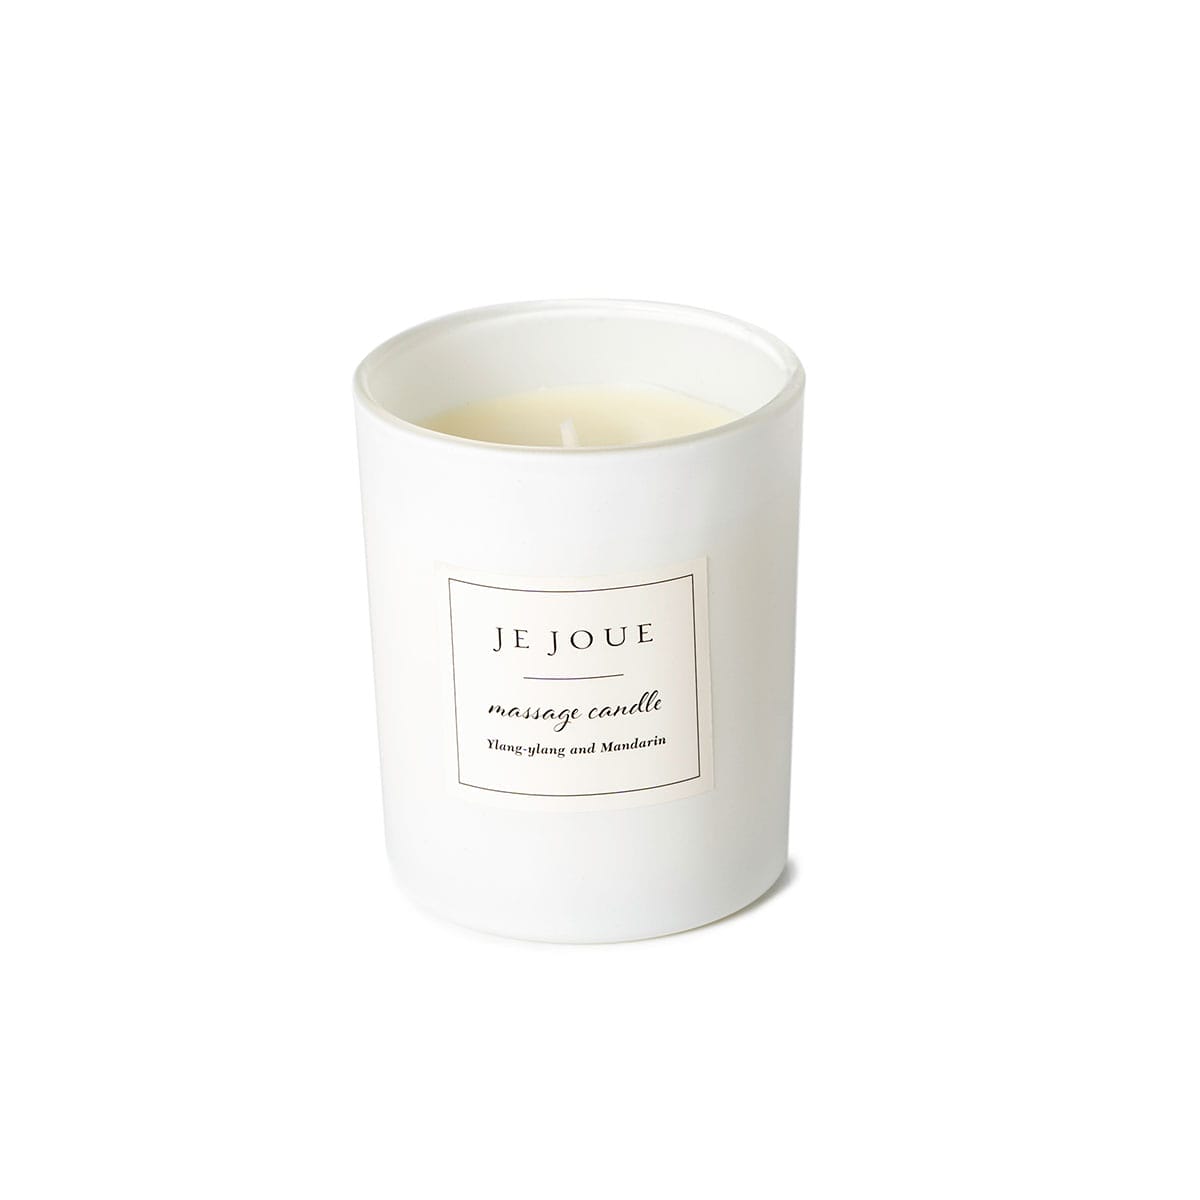 Buy Je Joue Massage Candle   Mandarin   and  Ylang Ylang for her or him.